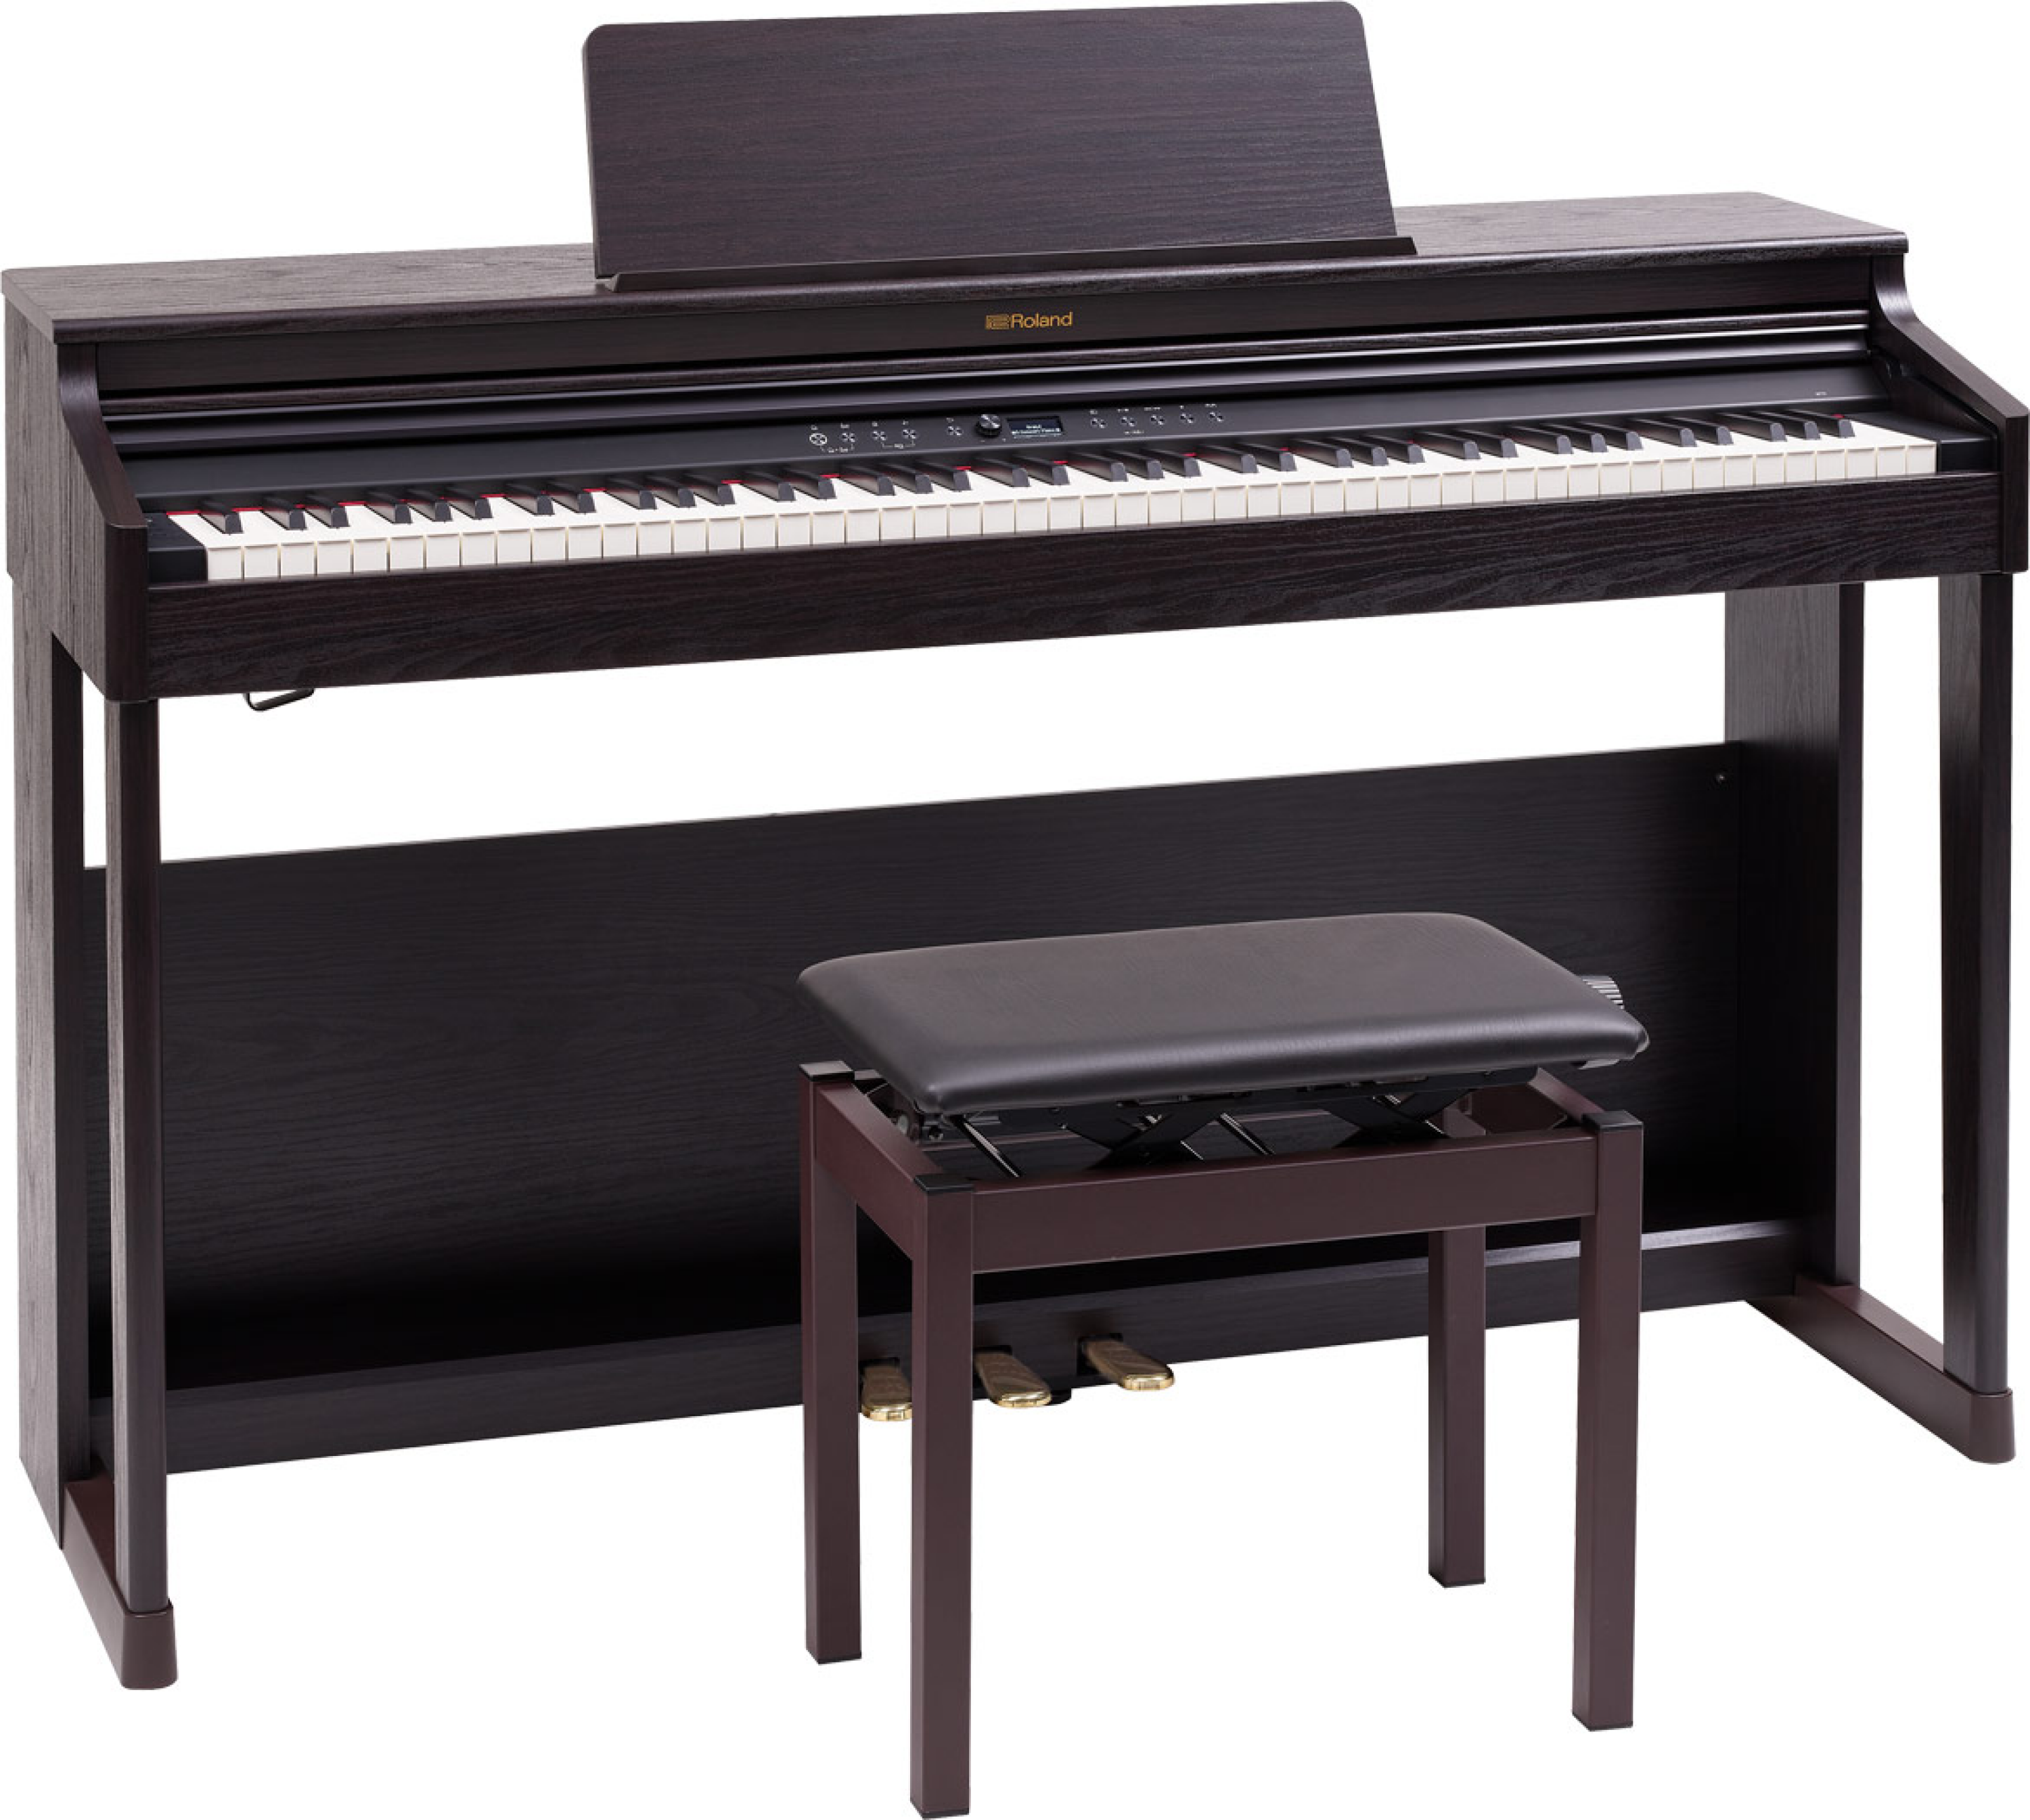 HP305 Digital Piano Overview 